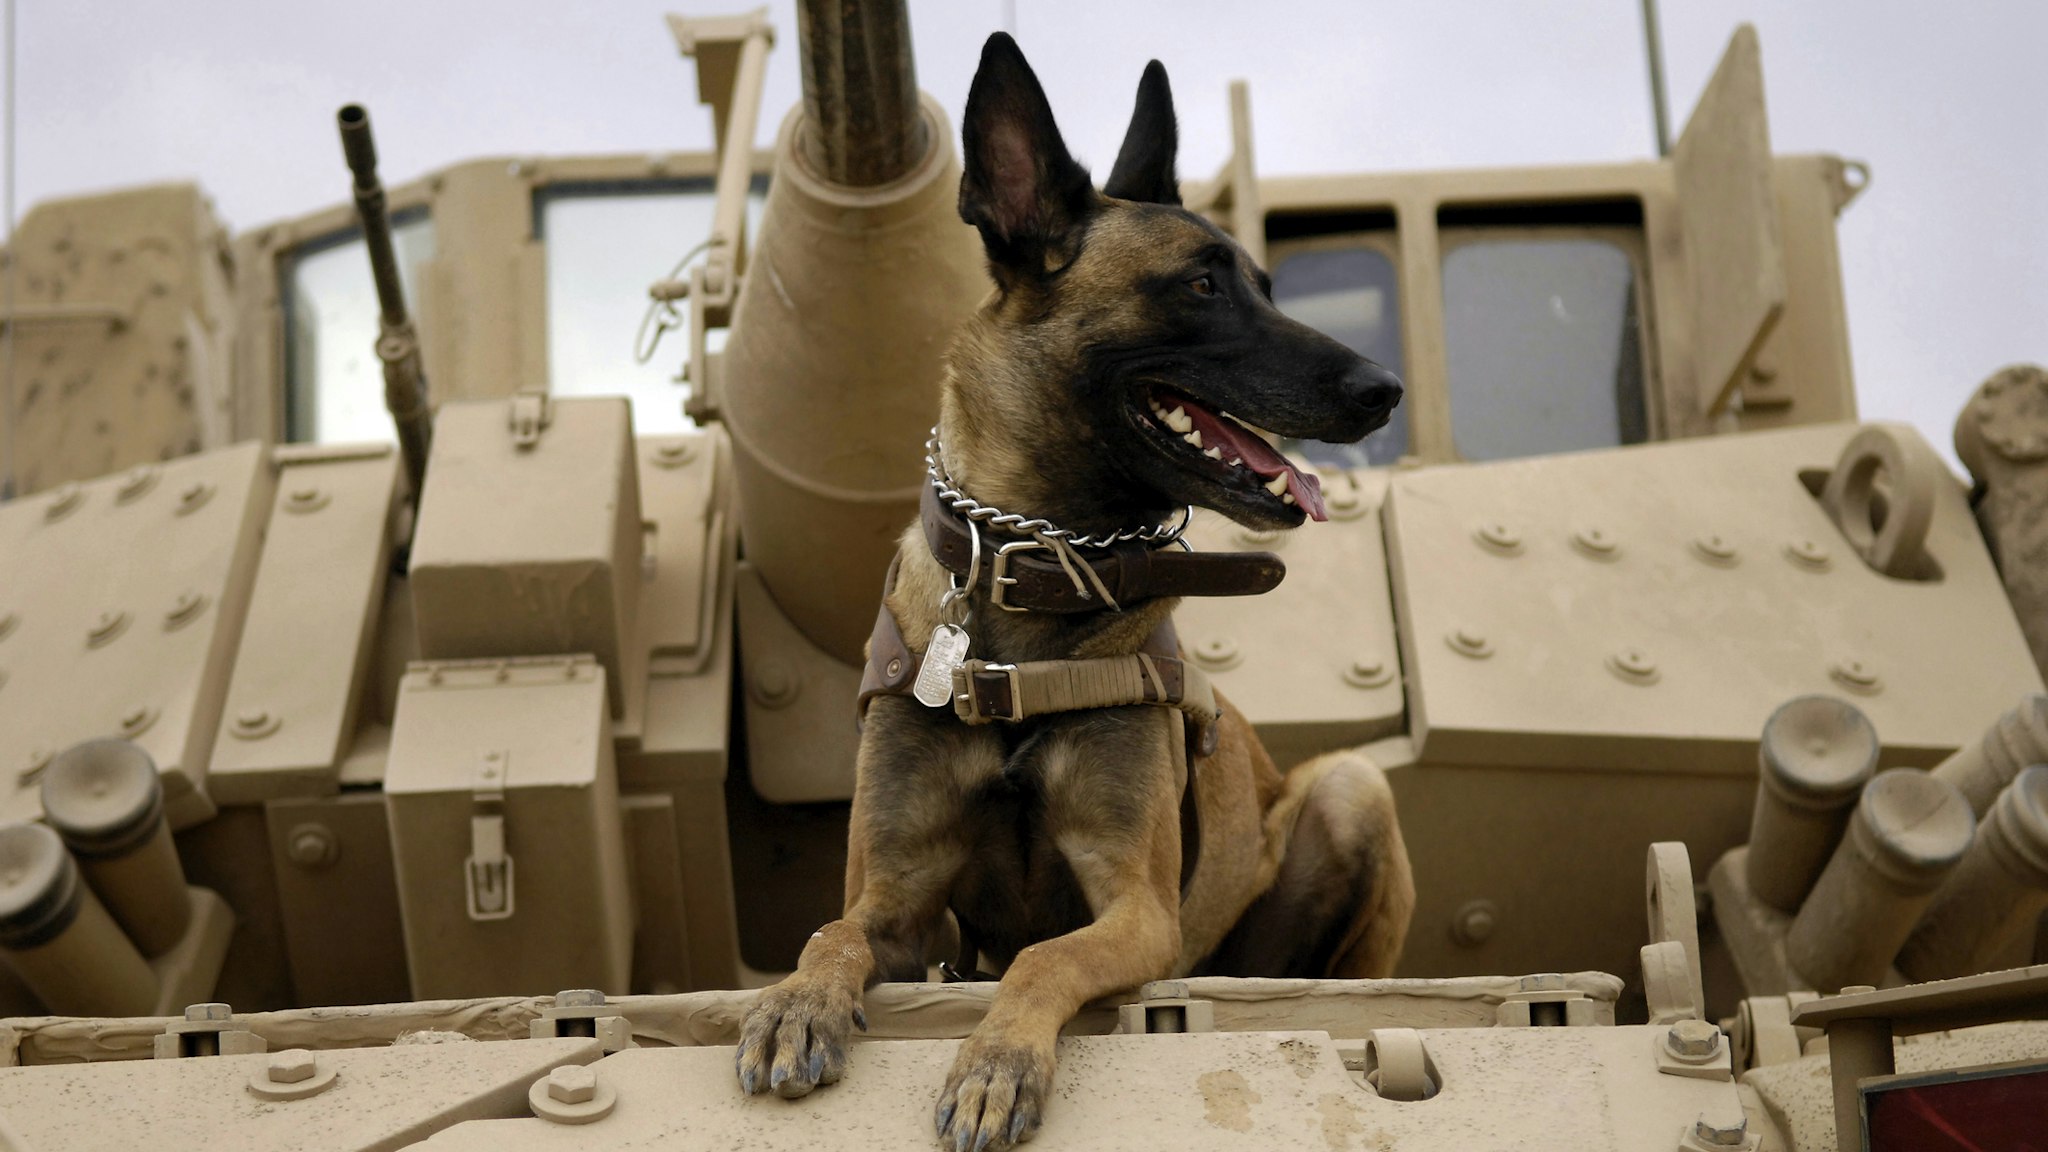 U.S. Air Force military working dog sits on a U.S. Army M2A3 Bradley Fighting Vehicle before heading out on a mission in Kahn Bani Sahd, Iraq, February 13, 2007, with his handler, of the 732nd Expeditionary Security Forces Squadron.